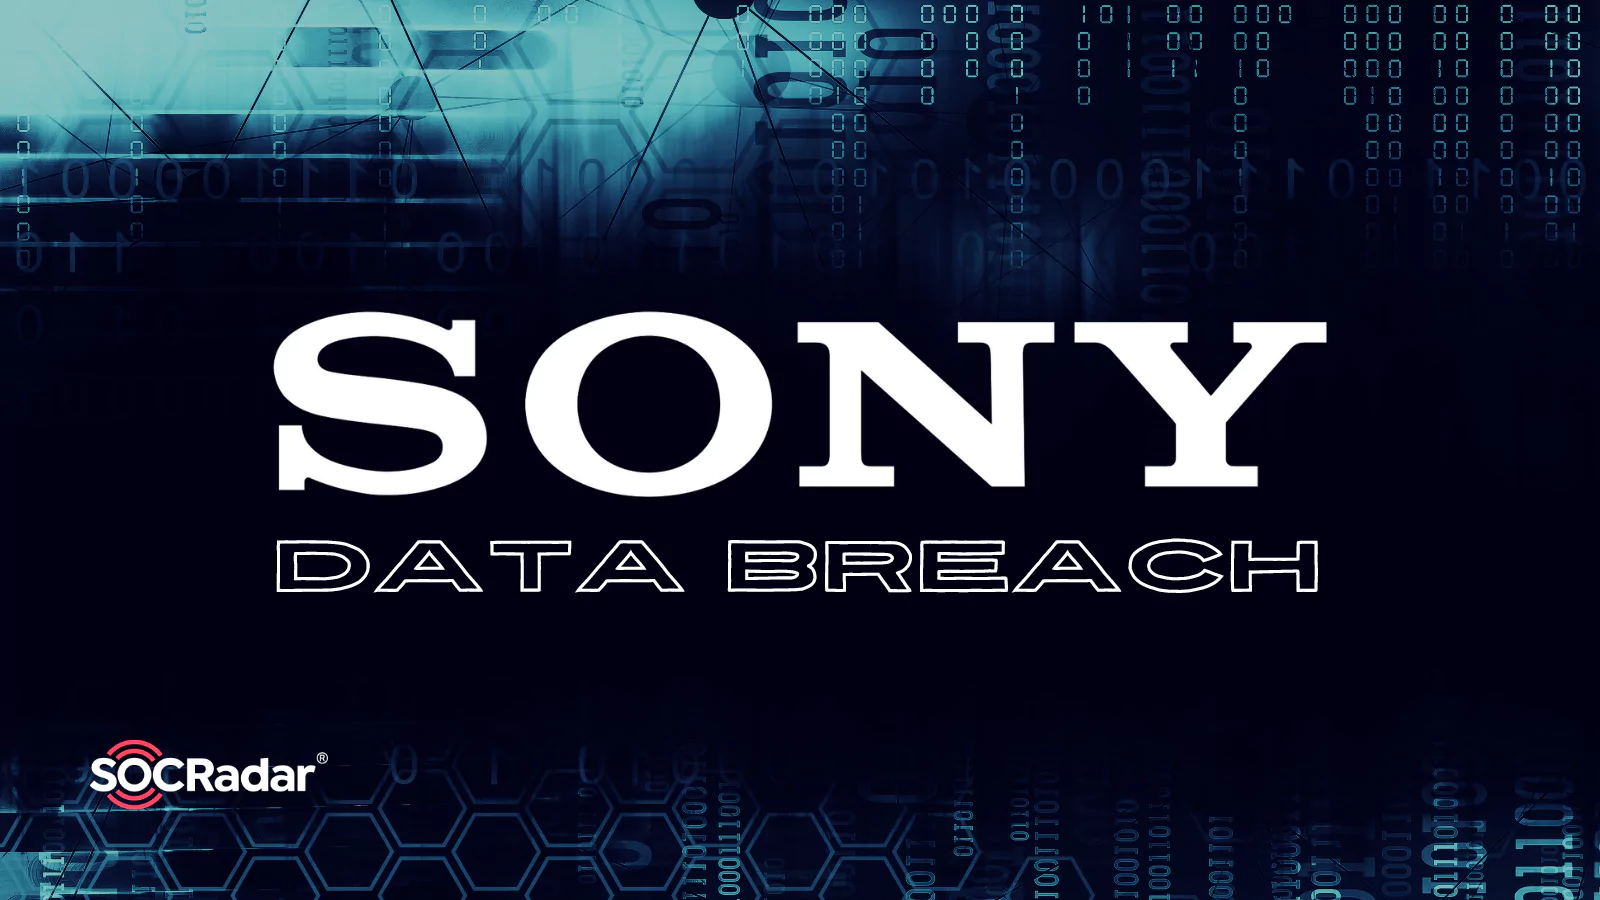 SOCRadar® Cyber Intelligence Inc. | What You Need to Know About the Alleged Sony Breach